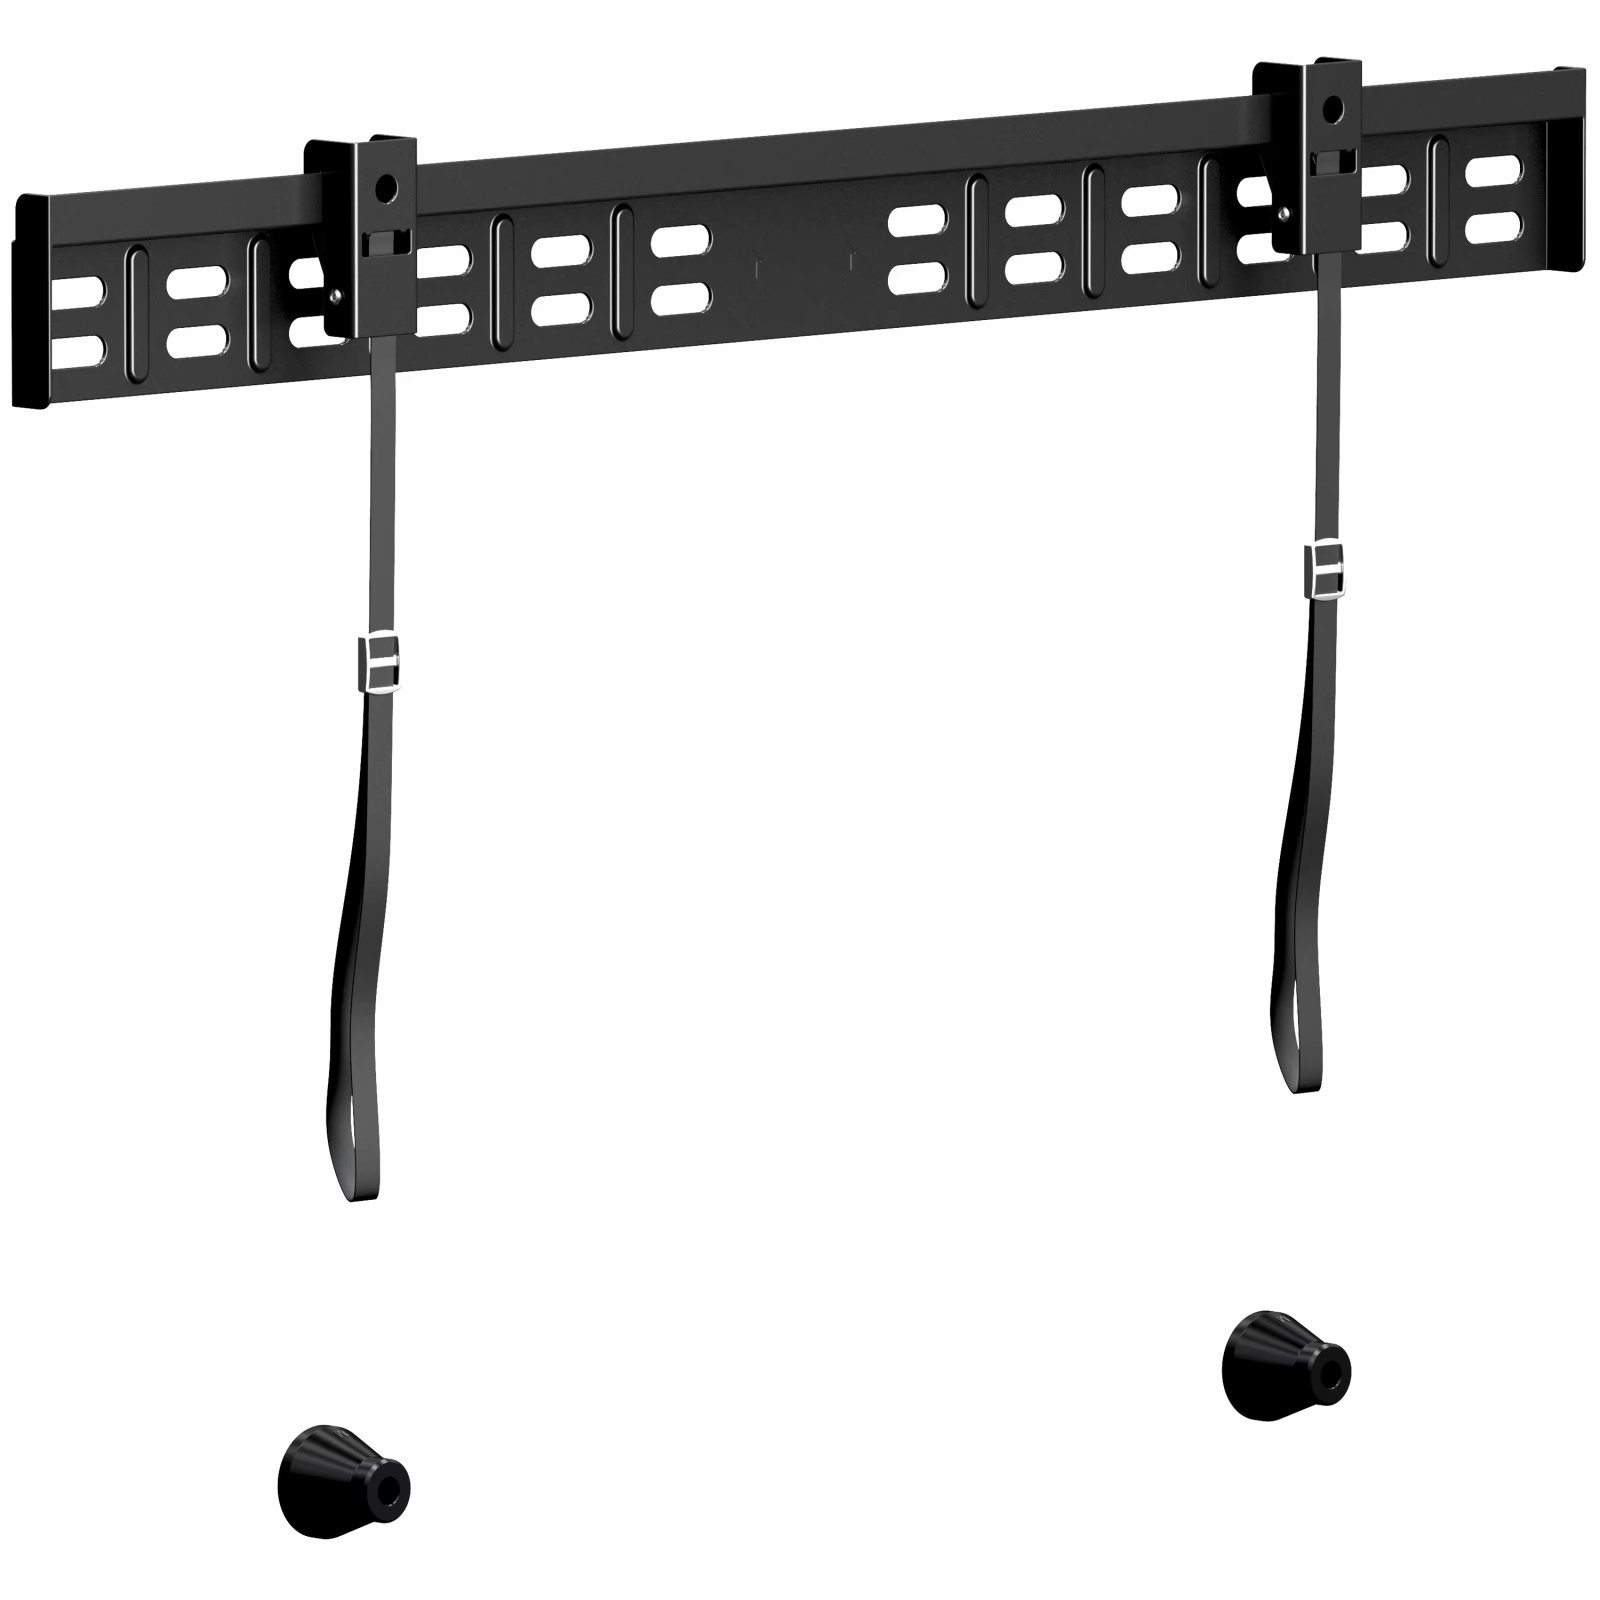 USX MOUNT Fixed TV Wall Mount Bracket for Max Screen Size ...